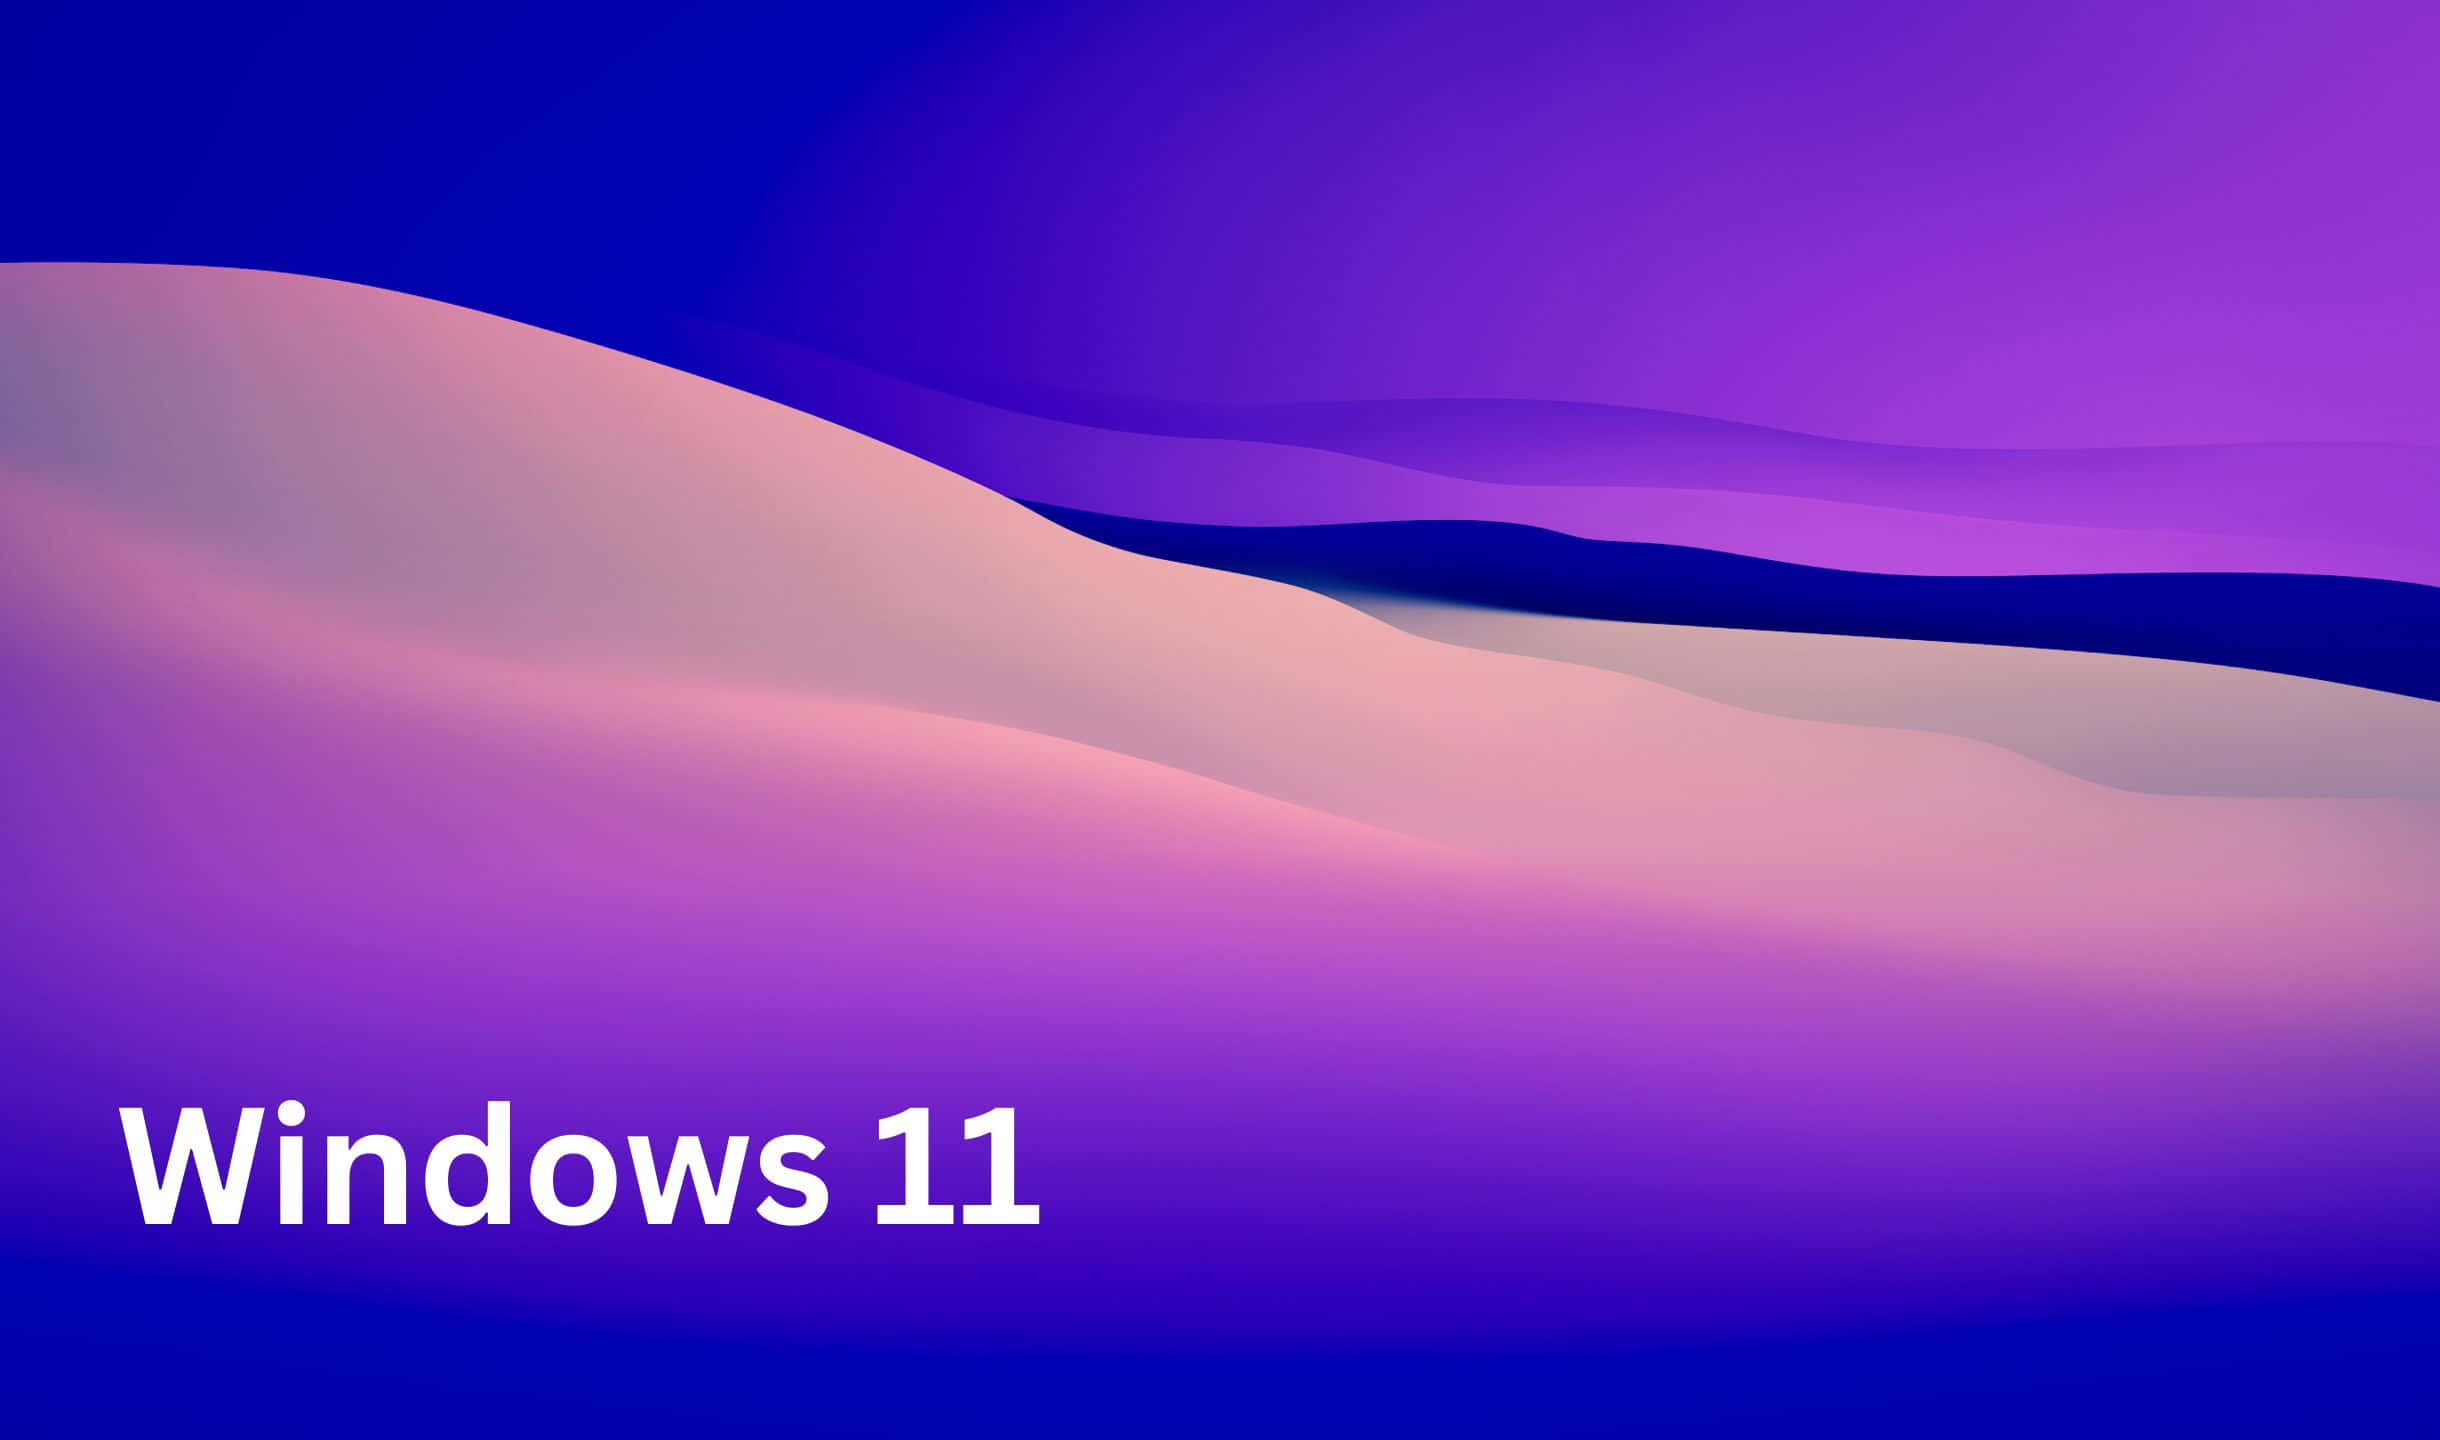 Windows 11 Wallpaper With A Purple Background